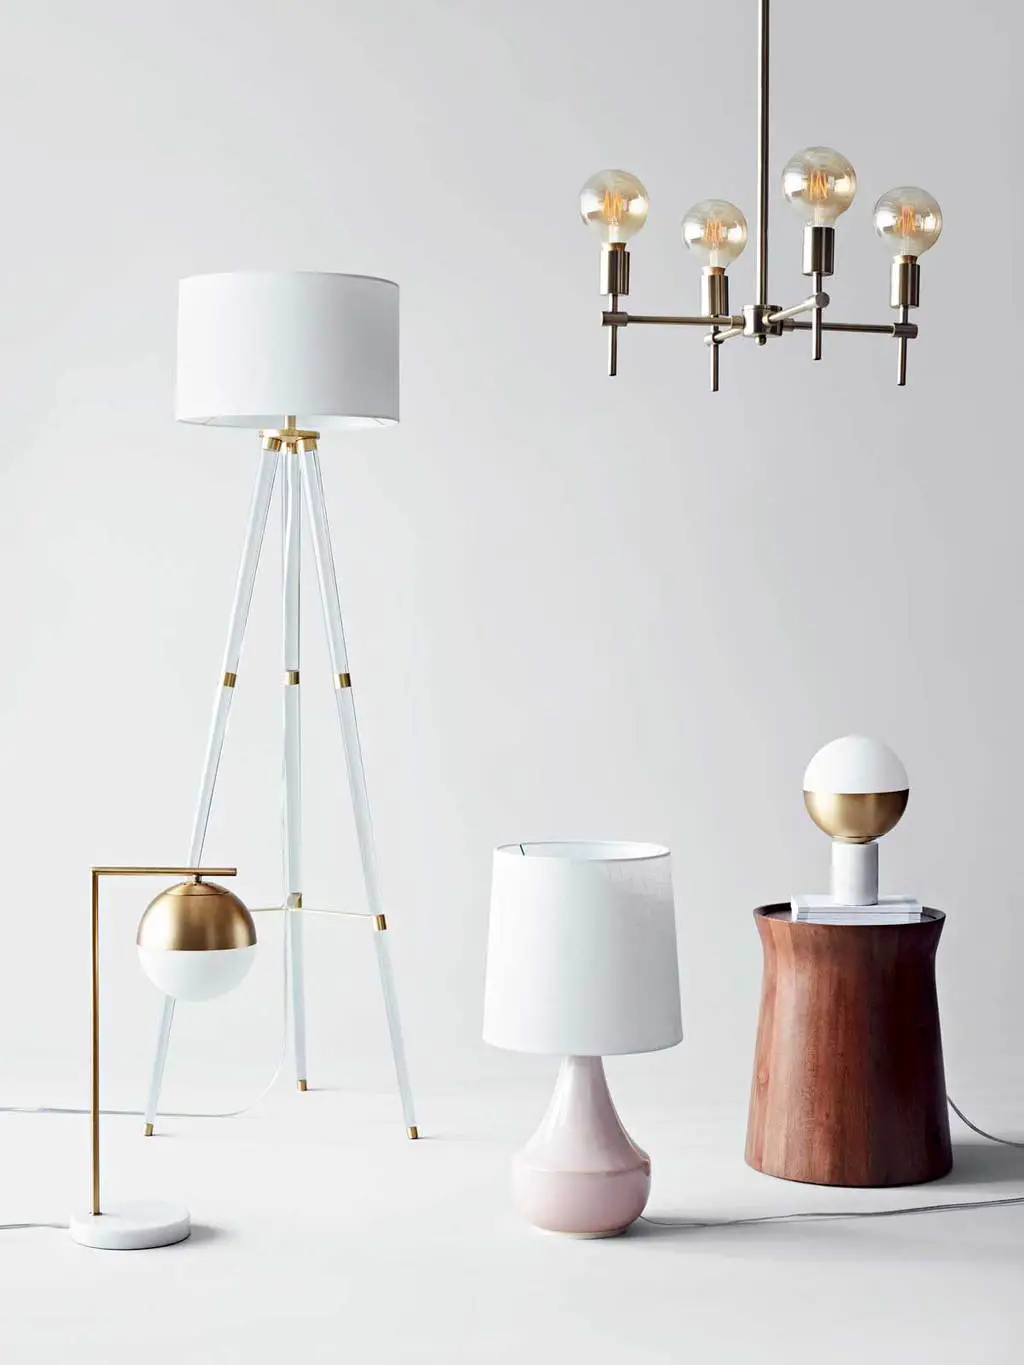 Modern lighting with lucite and brass from Project 62 on Thou Swell @thouswellblog